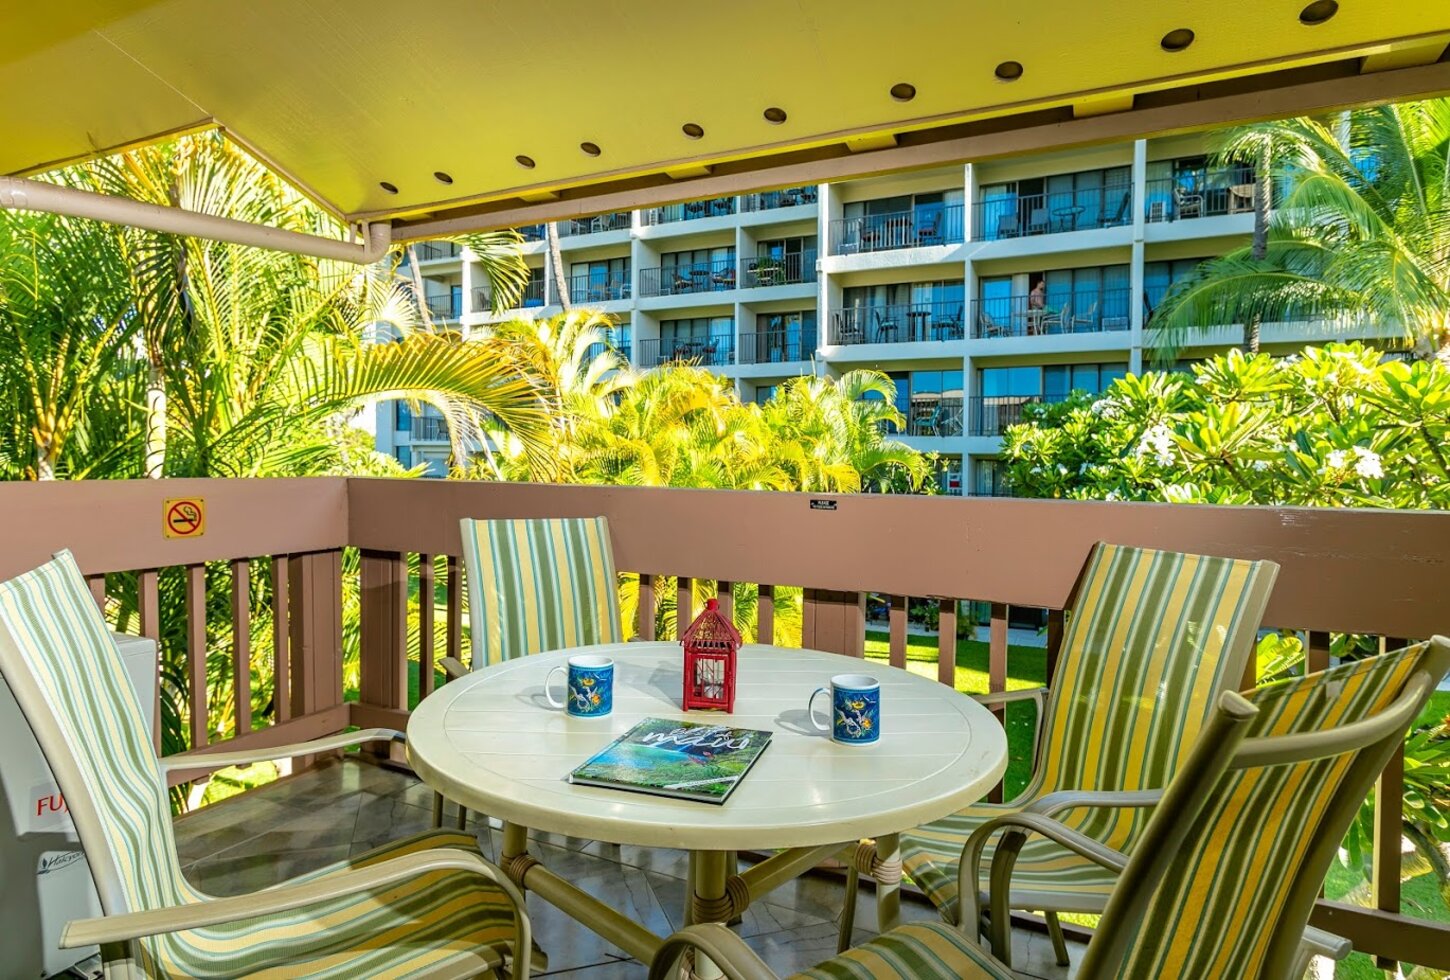 Surrounded by lush greenery the Lanai is a Relaxed space for morning coffee